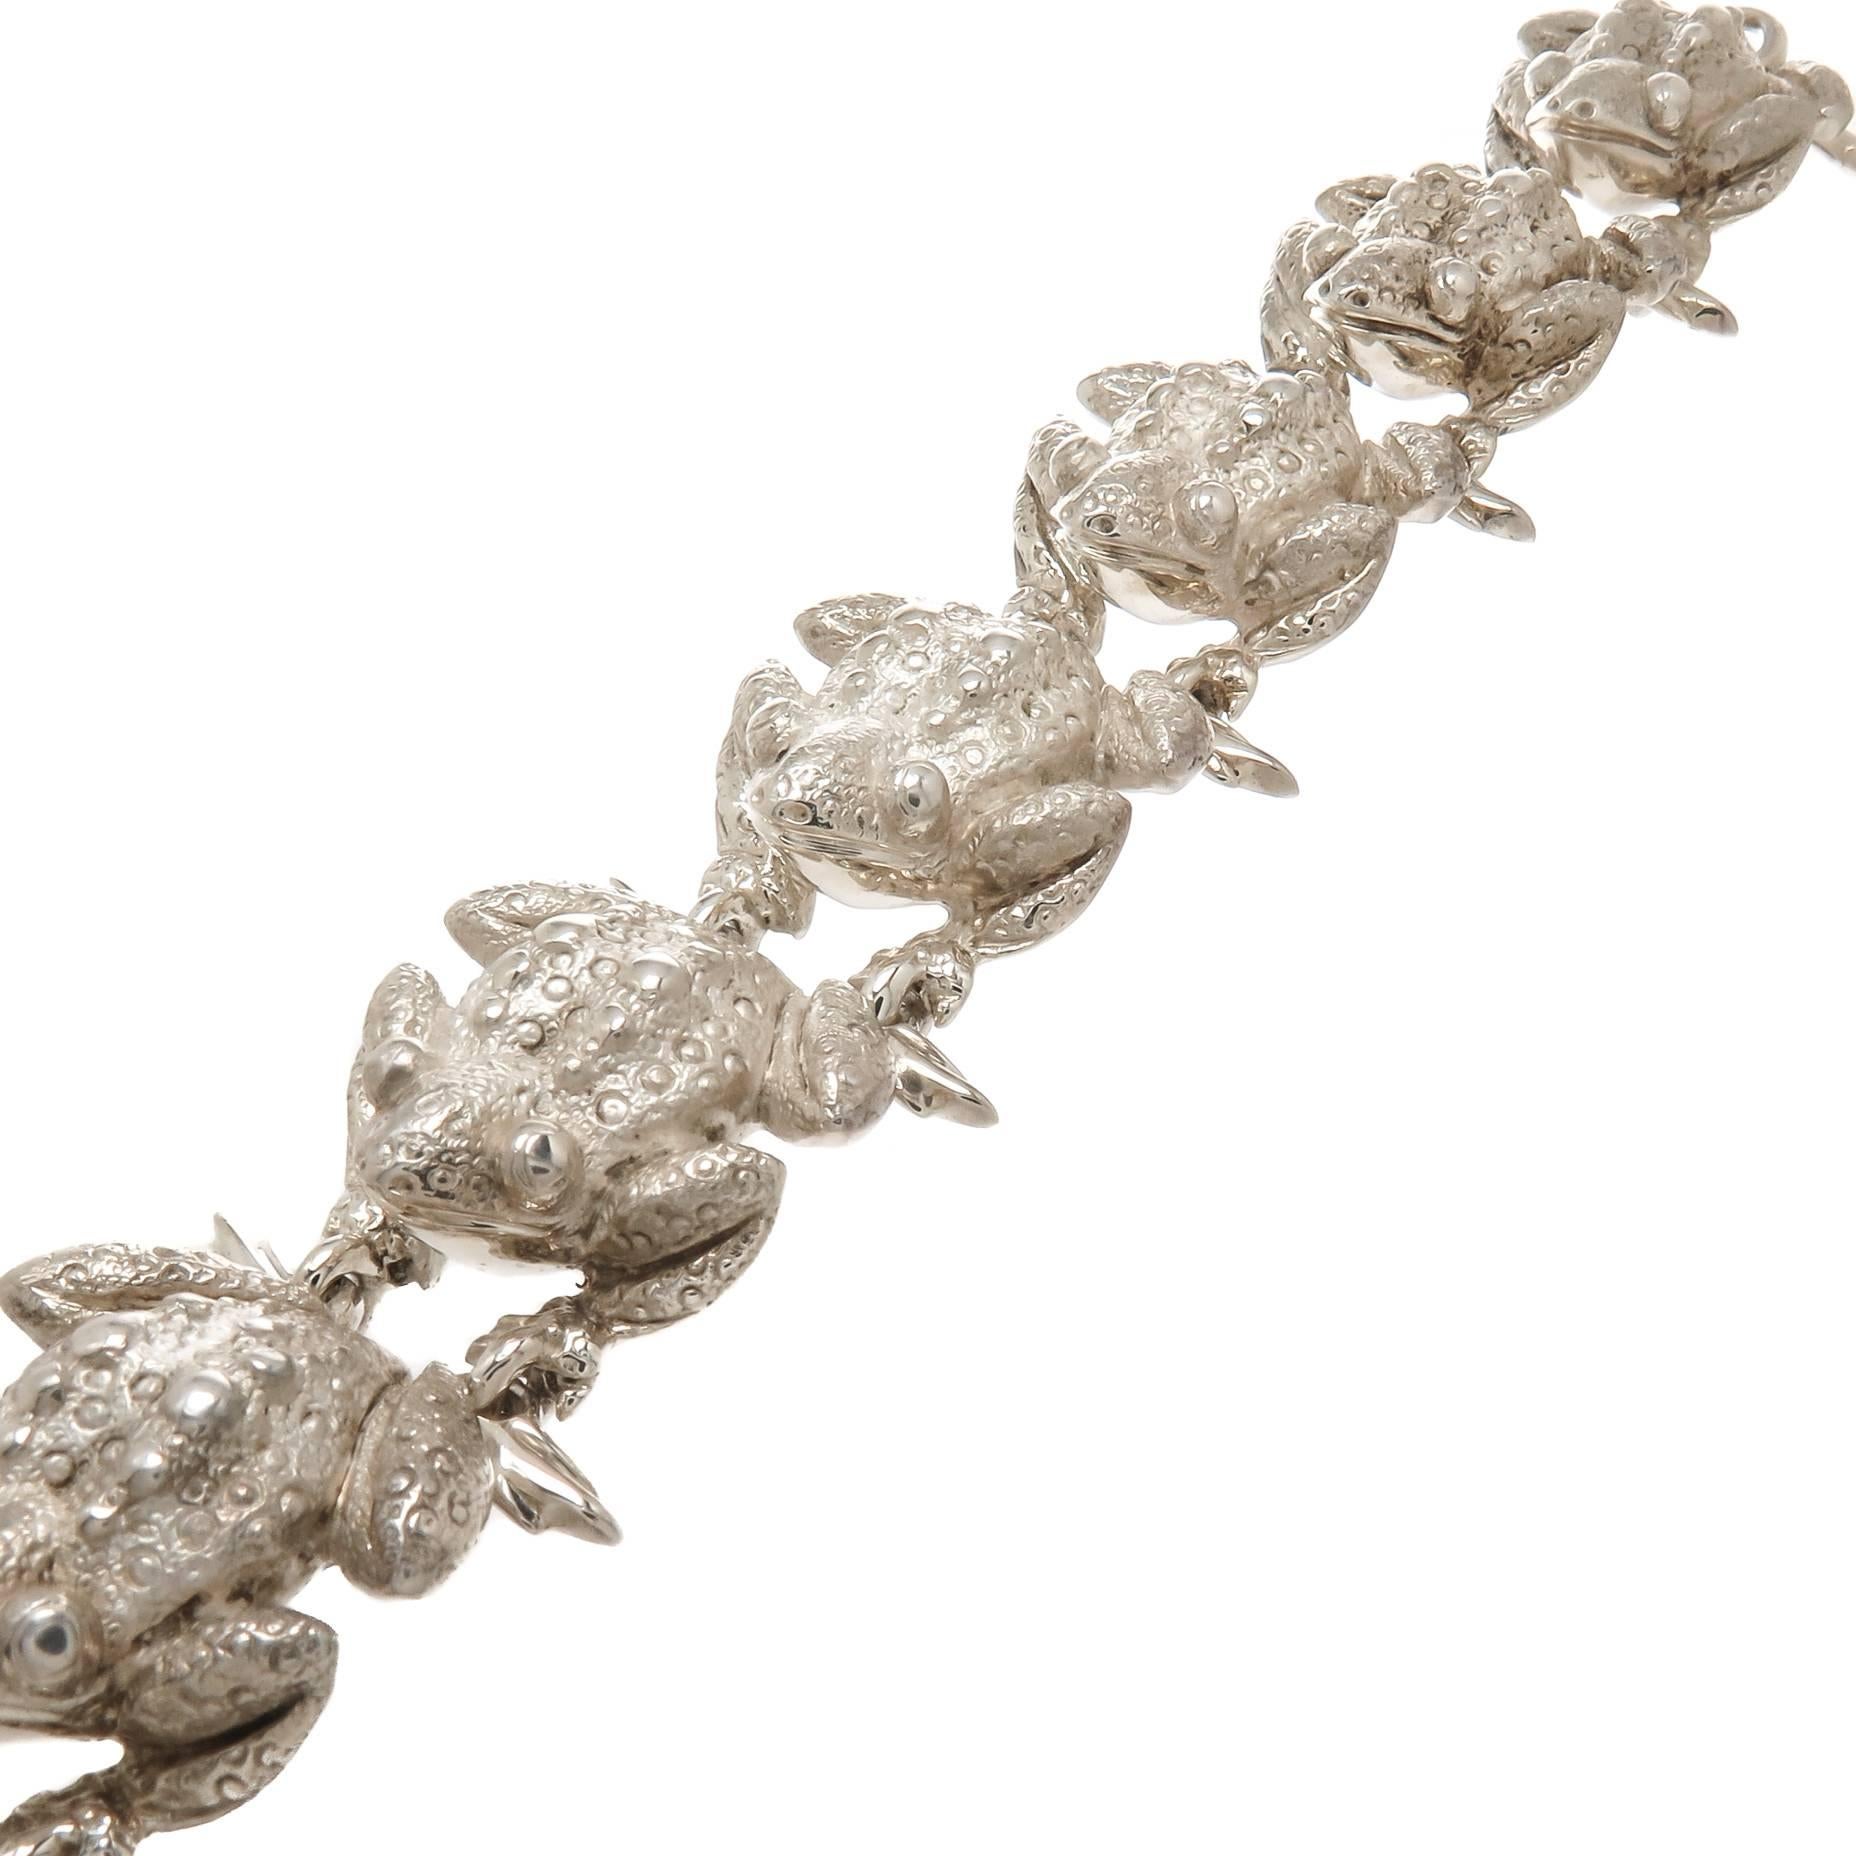 Circa 1980 Tiffany & Company sterling silver Bull Frogs Bracelet. Nice Heavy individually linked Bull Frogs, very detailed and textured. A very scarce Tiffany Piece. Measuring 7 1/2 Inch in Length and 1 inch wide. Comes in a Tiffany Felt storage